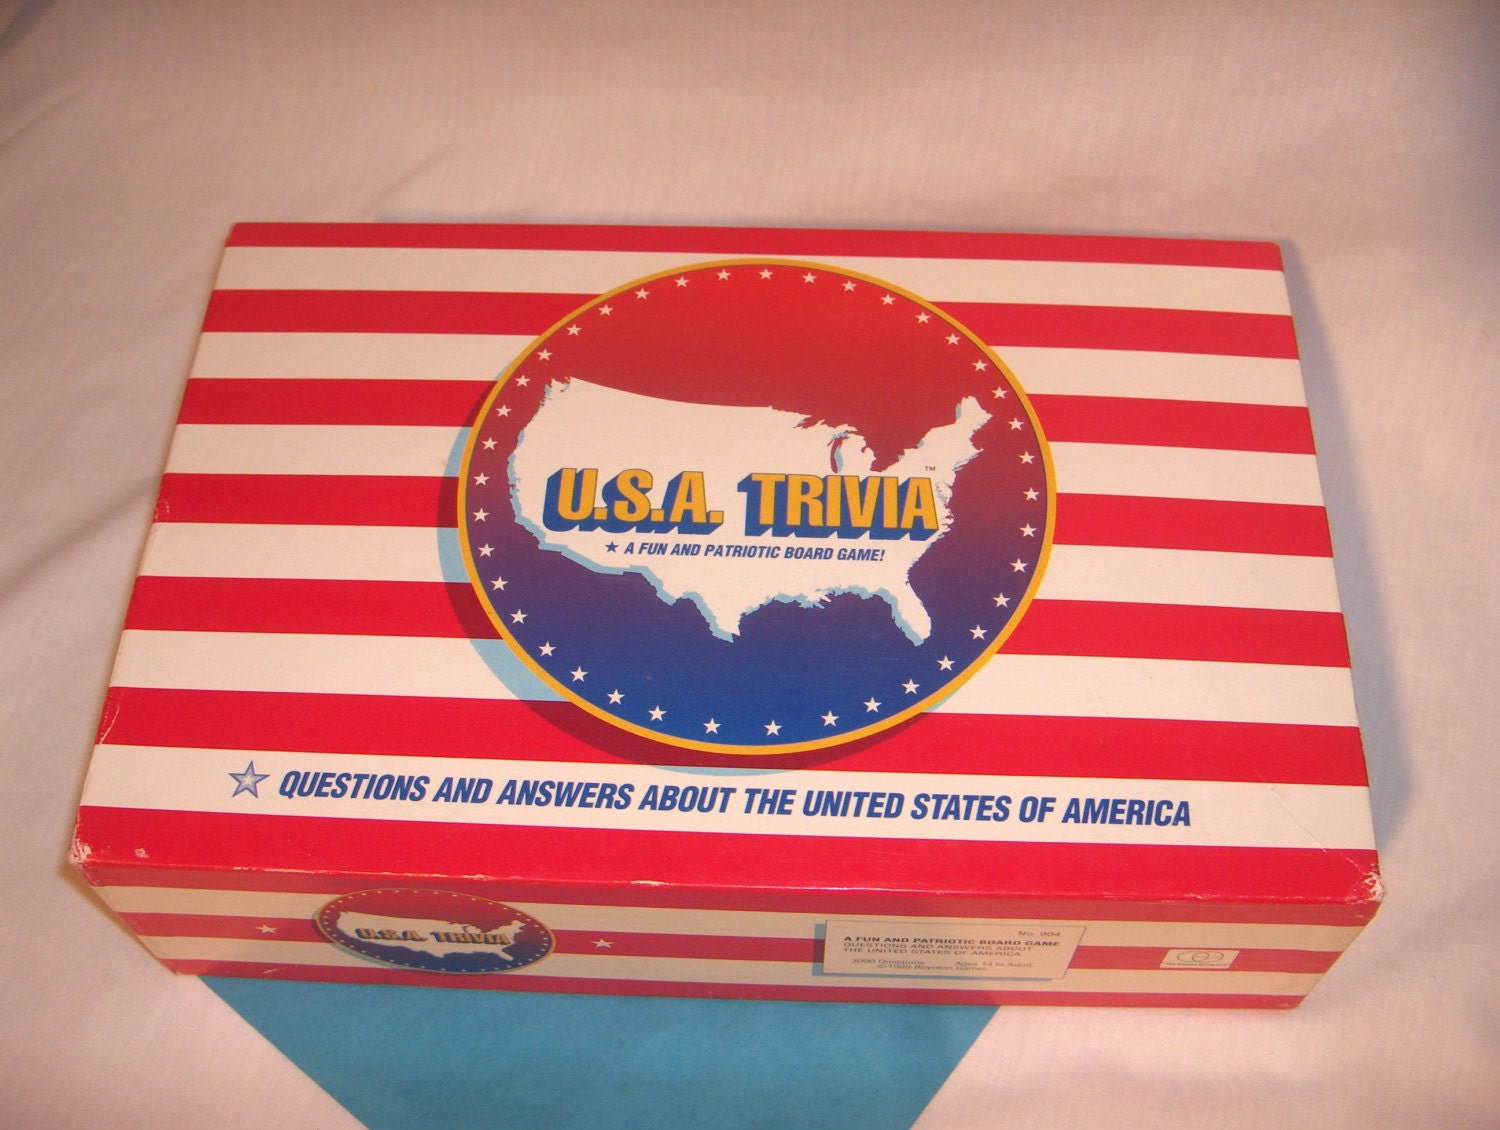 USA TRIVIA Game 1989 A Fun and Patriotic Board Game Vintage 